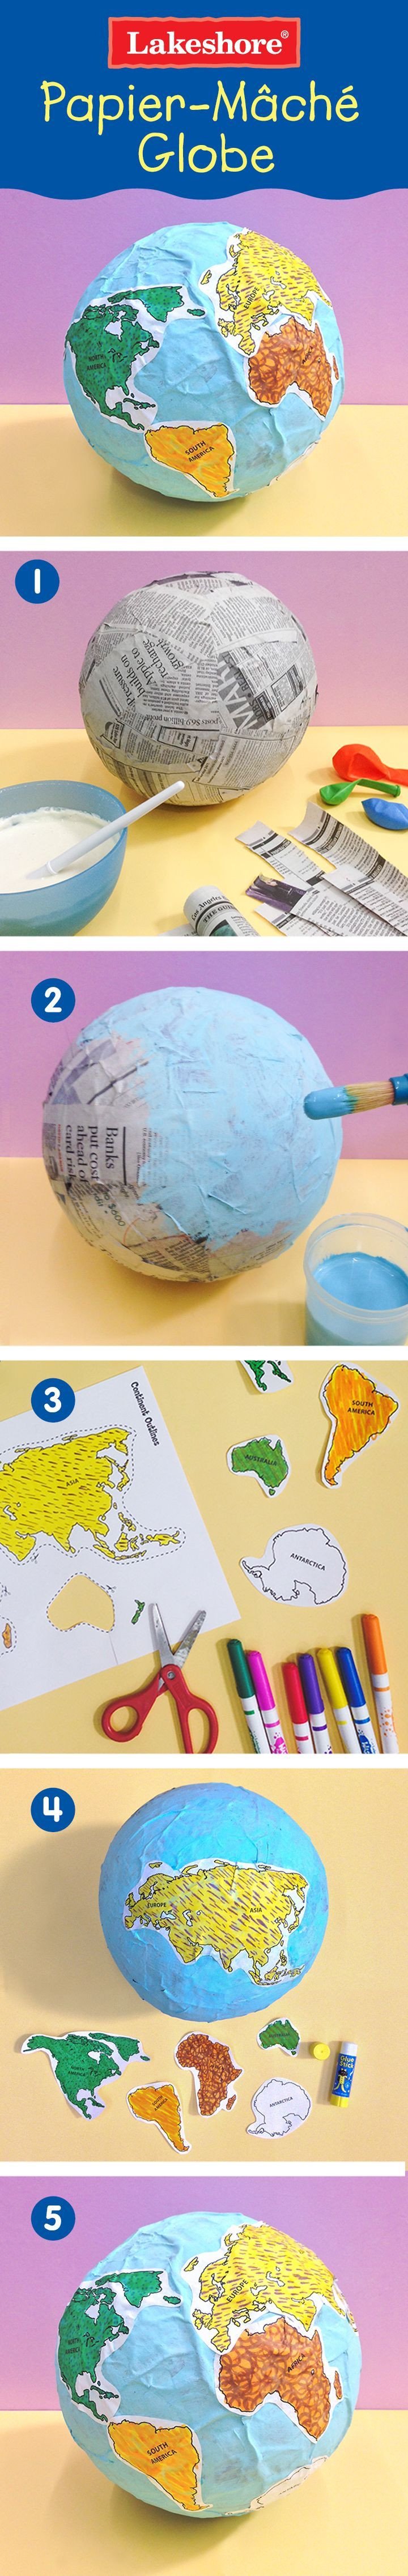 Paper mache globe project With printable Continent